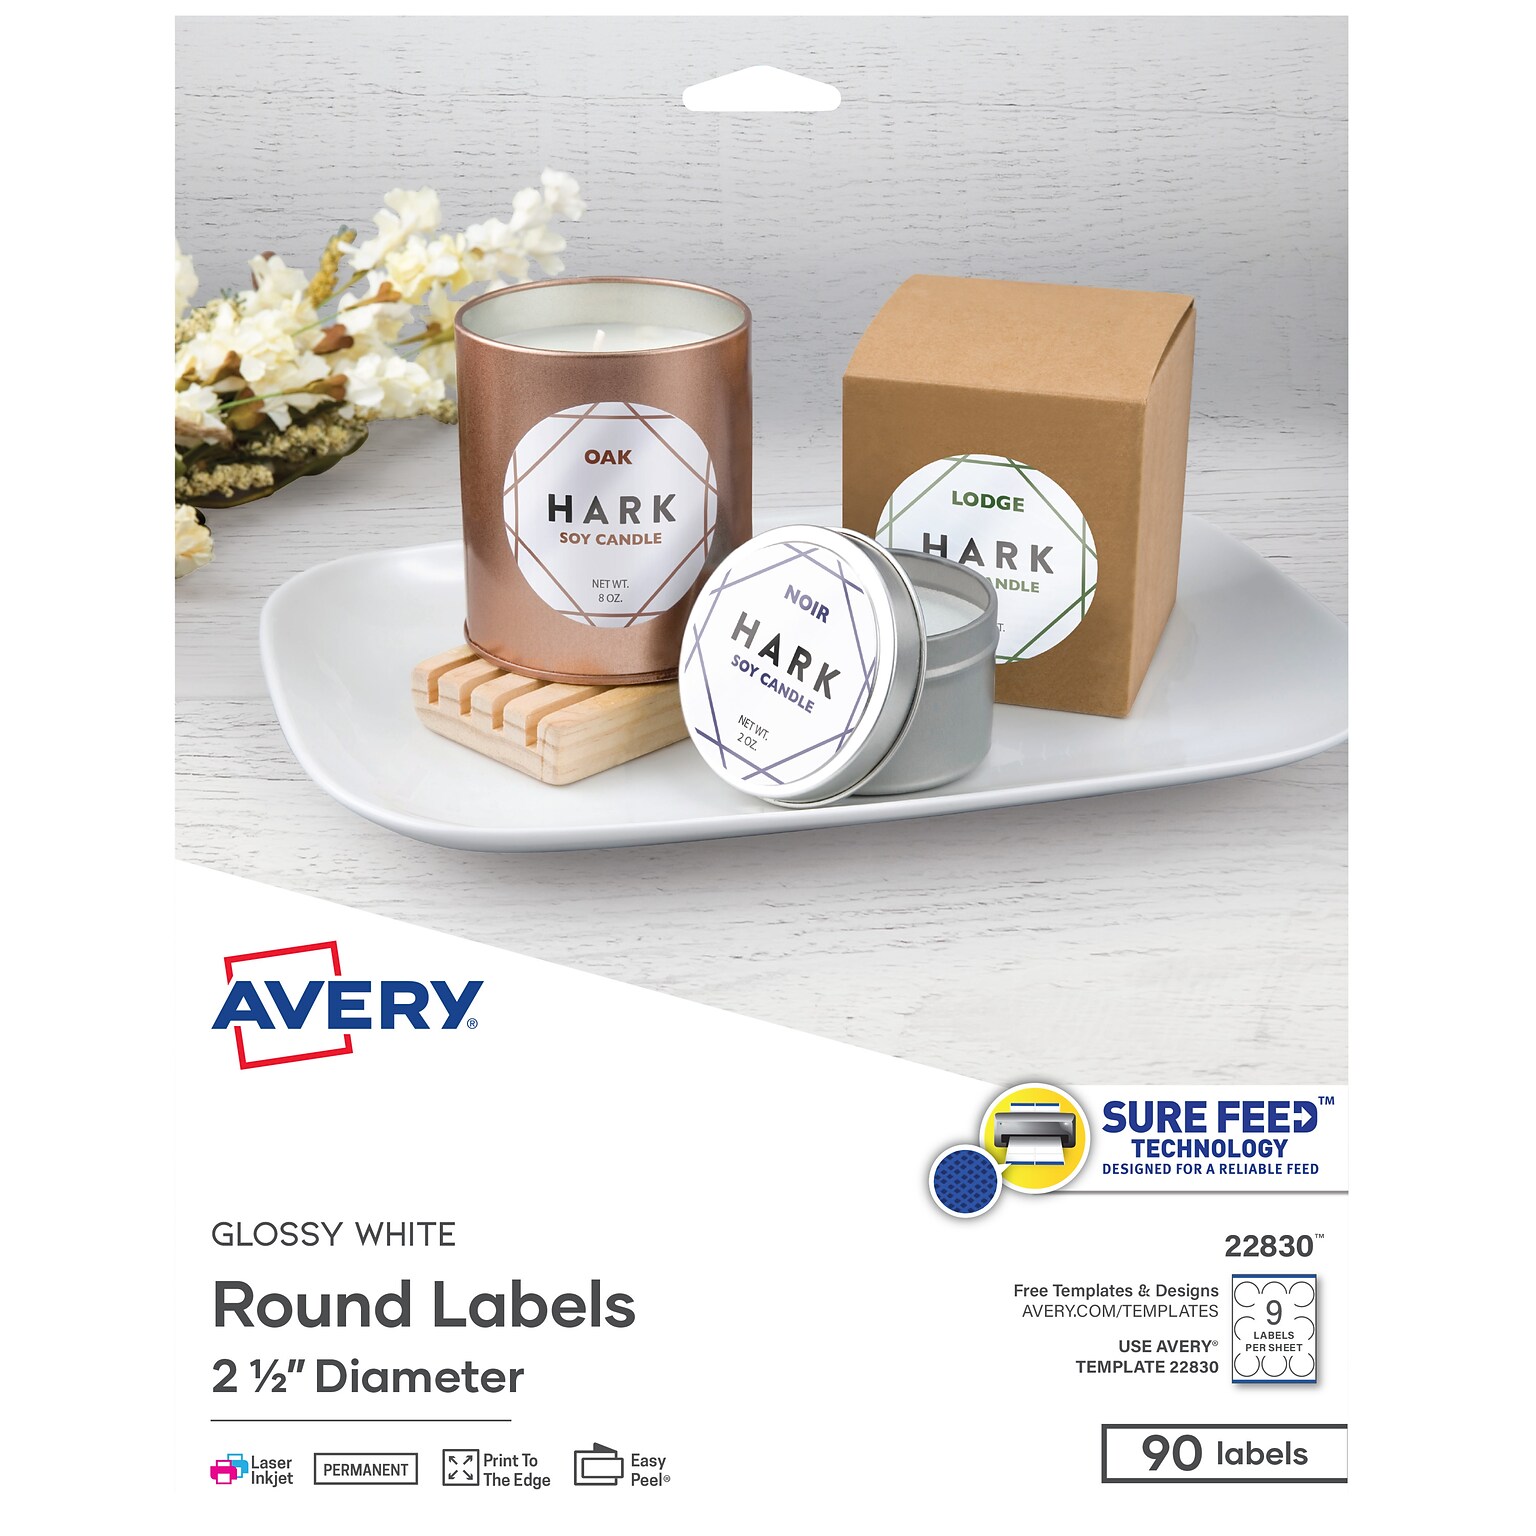 Avery Print-to-the-Edge Laser/Inkjet Labels, 2 1/2 Diameter, White, 9 Labels/Sheet, 10 Sheets/Pack, 90 Labels/Pack (22830)